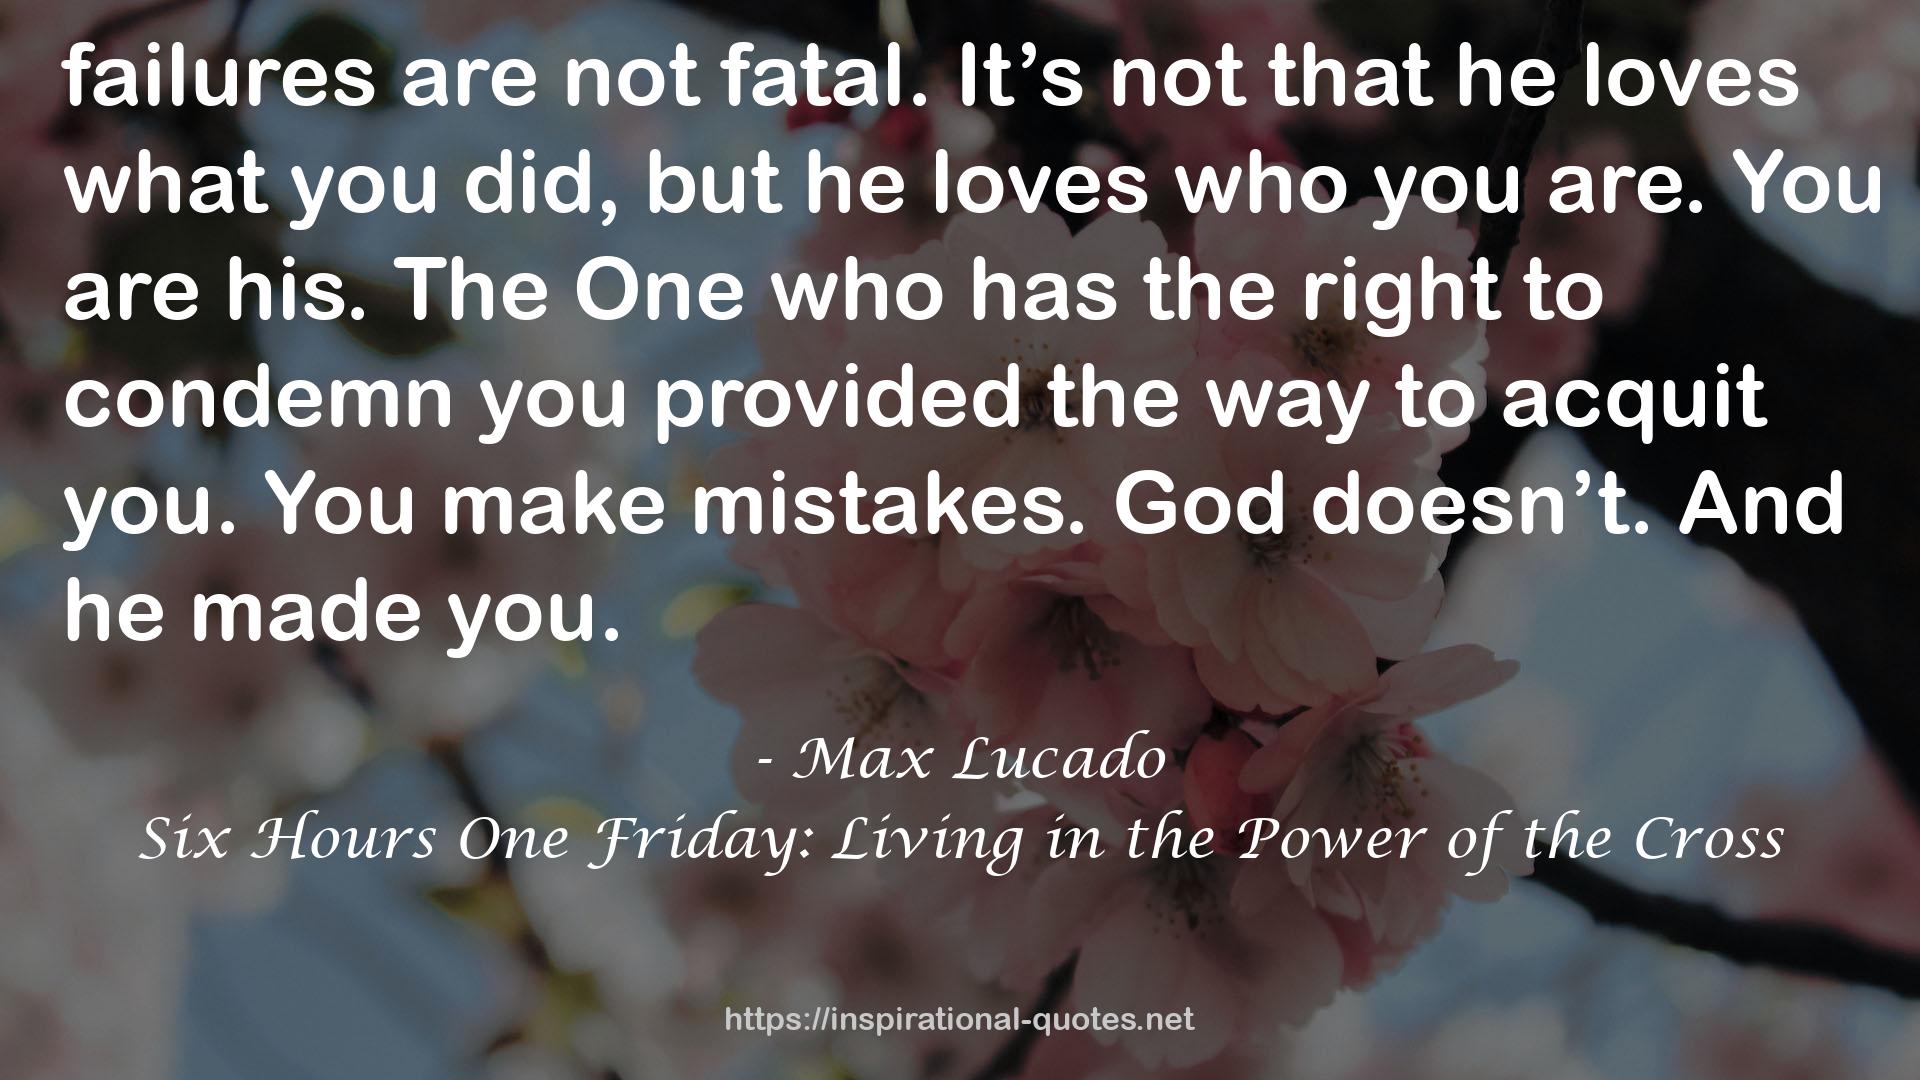 Six Hours One Friday: Living in the Power of the Cross QUOTES